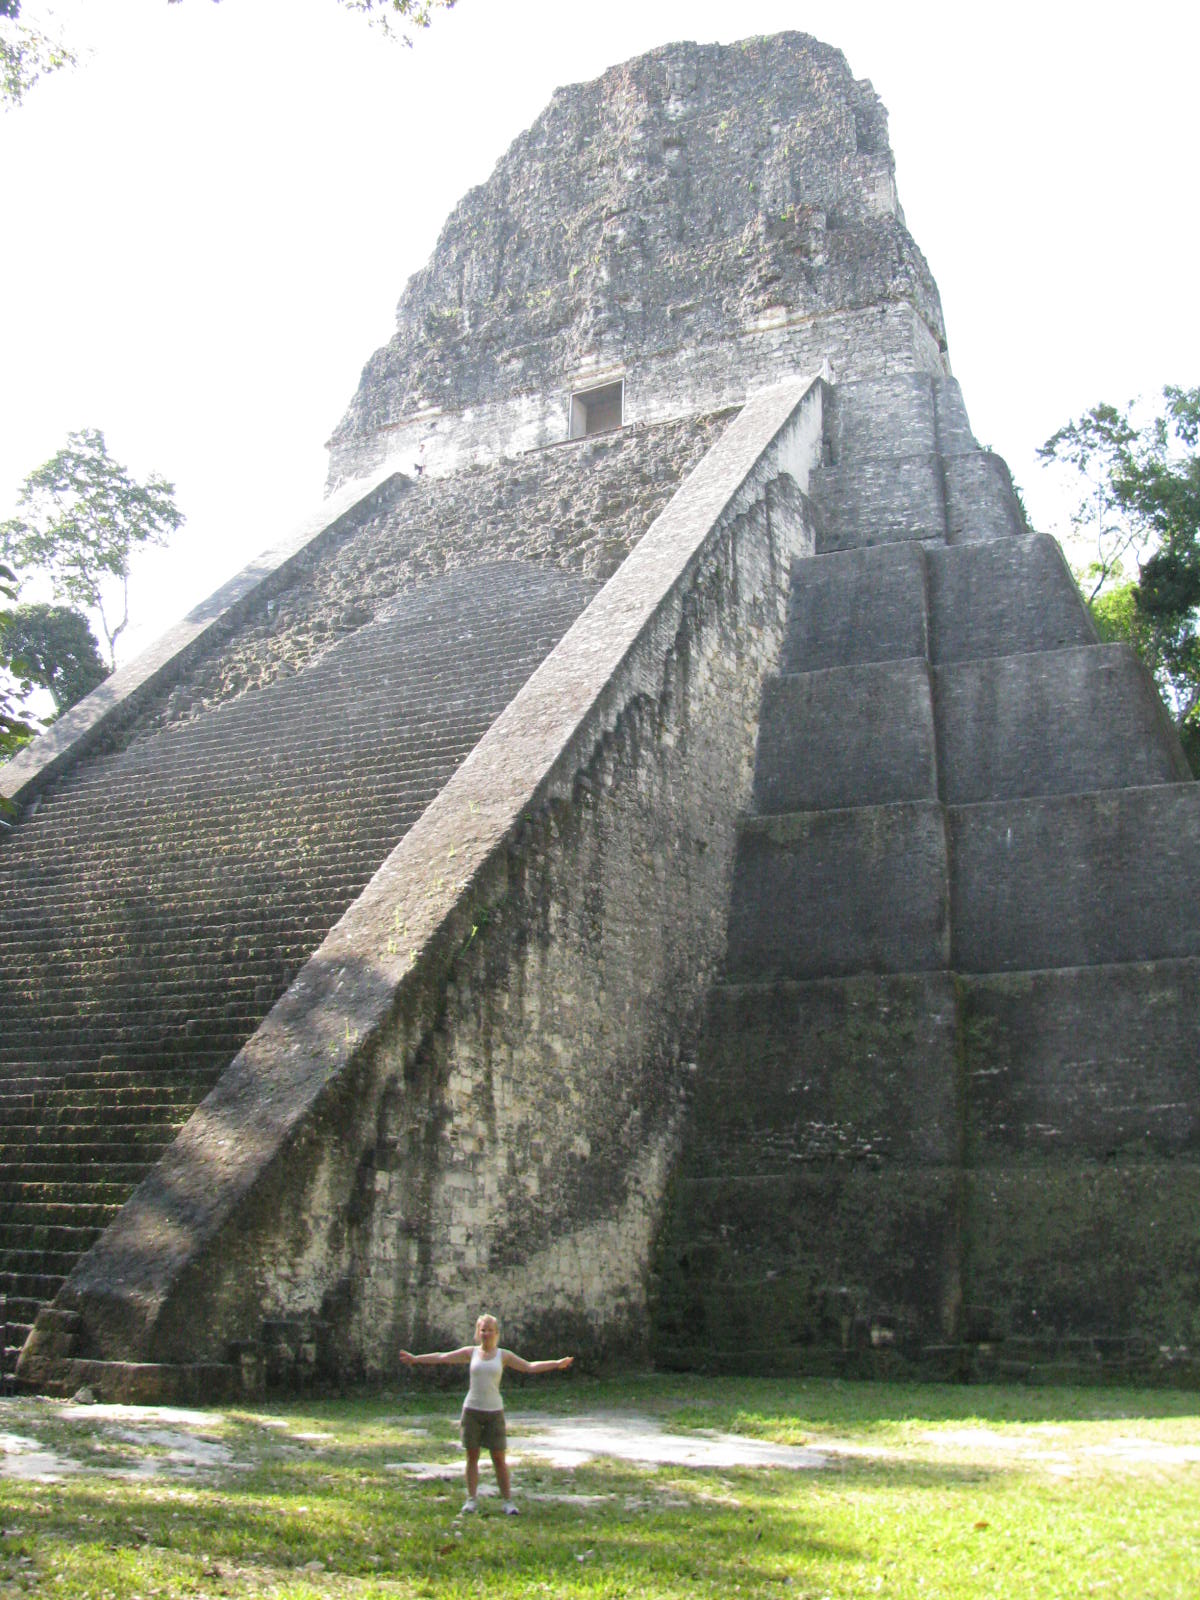 a man is in front of a very large structure